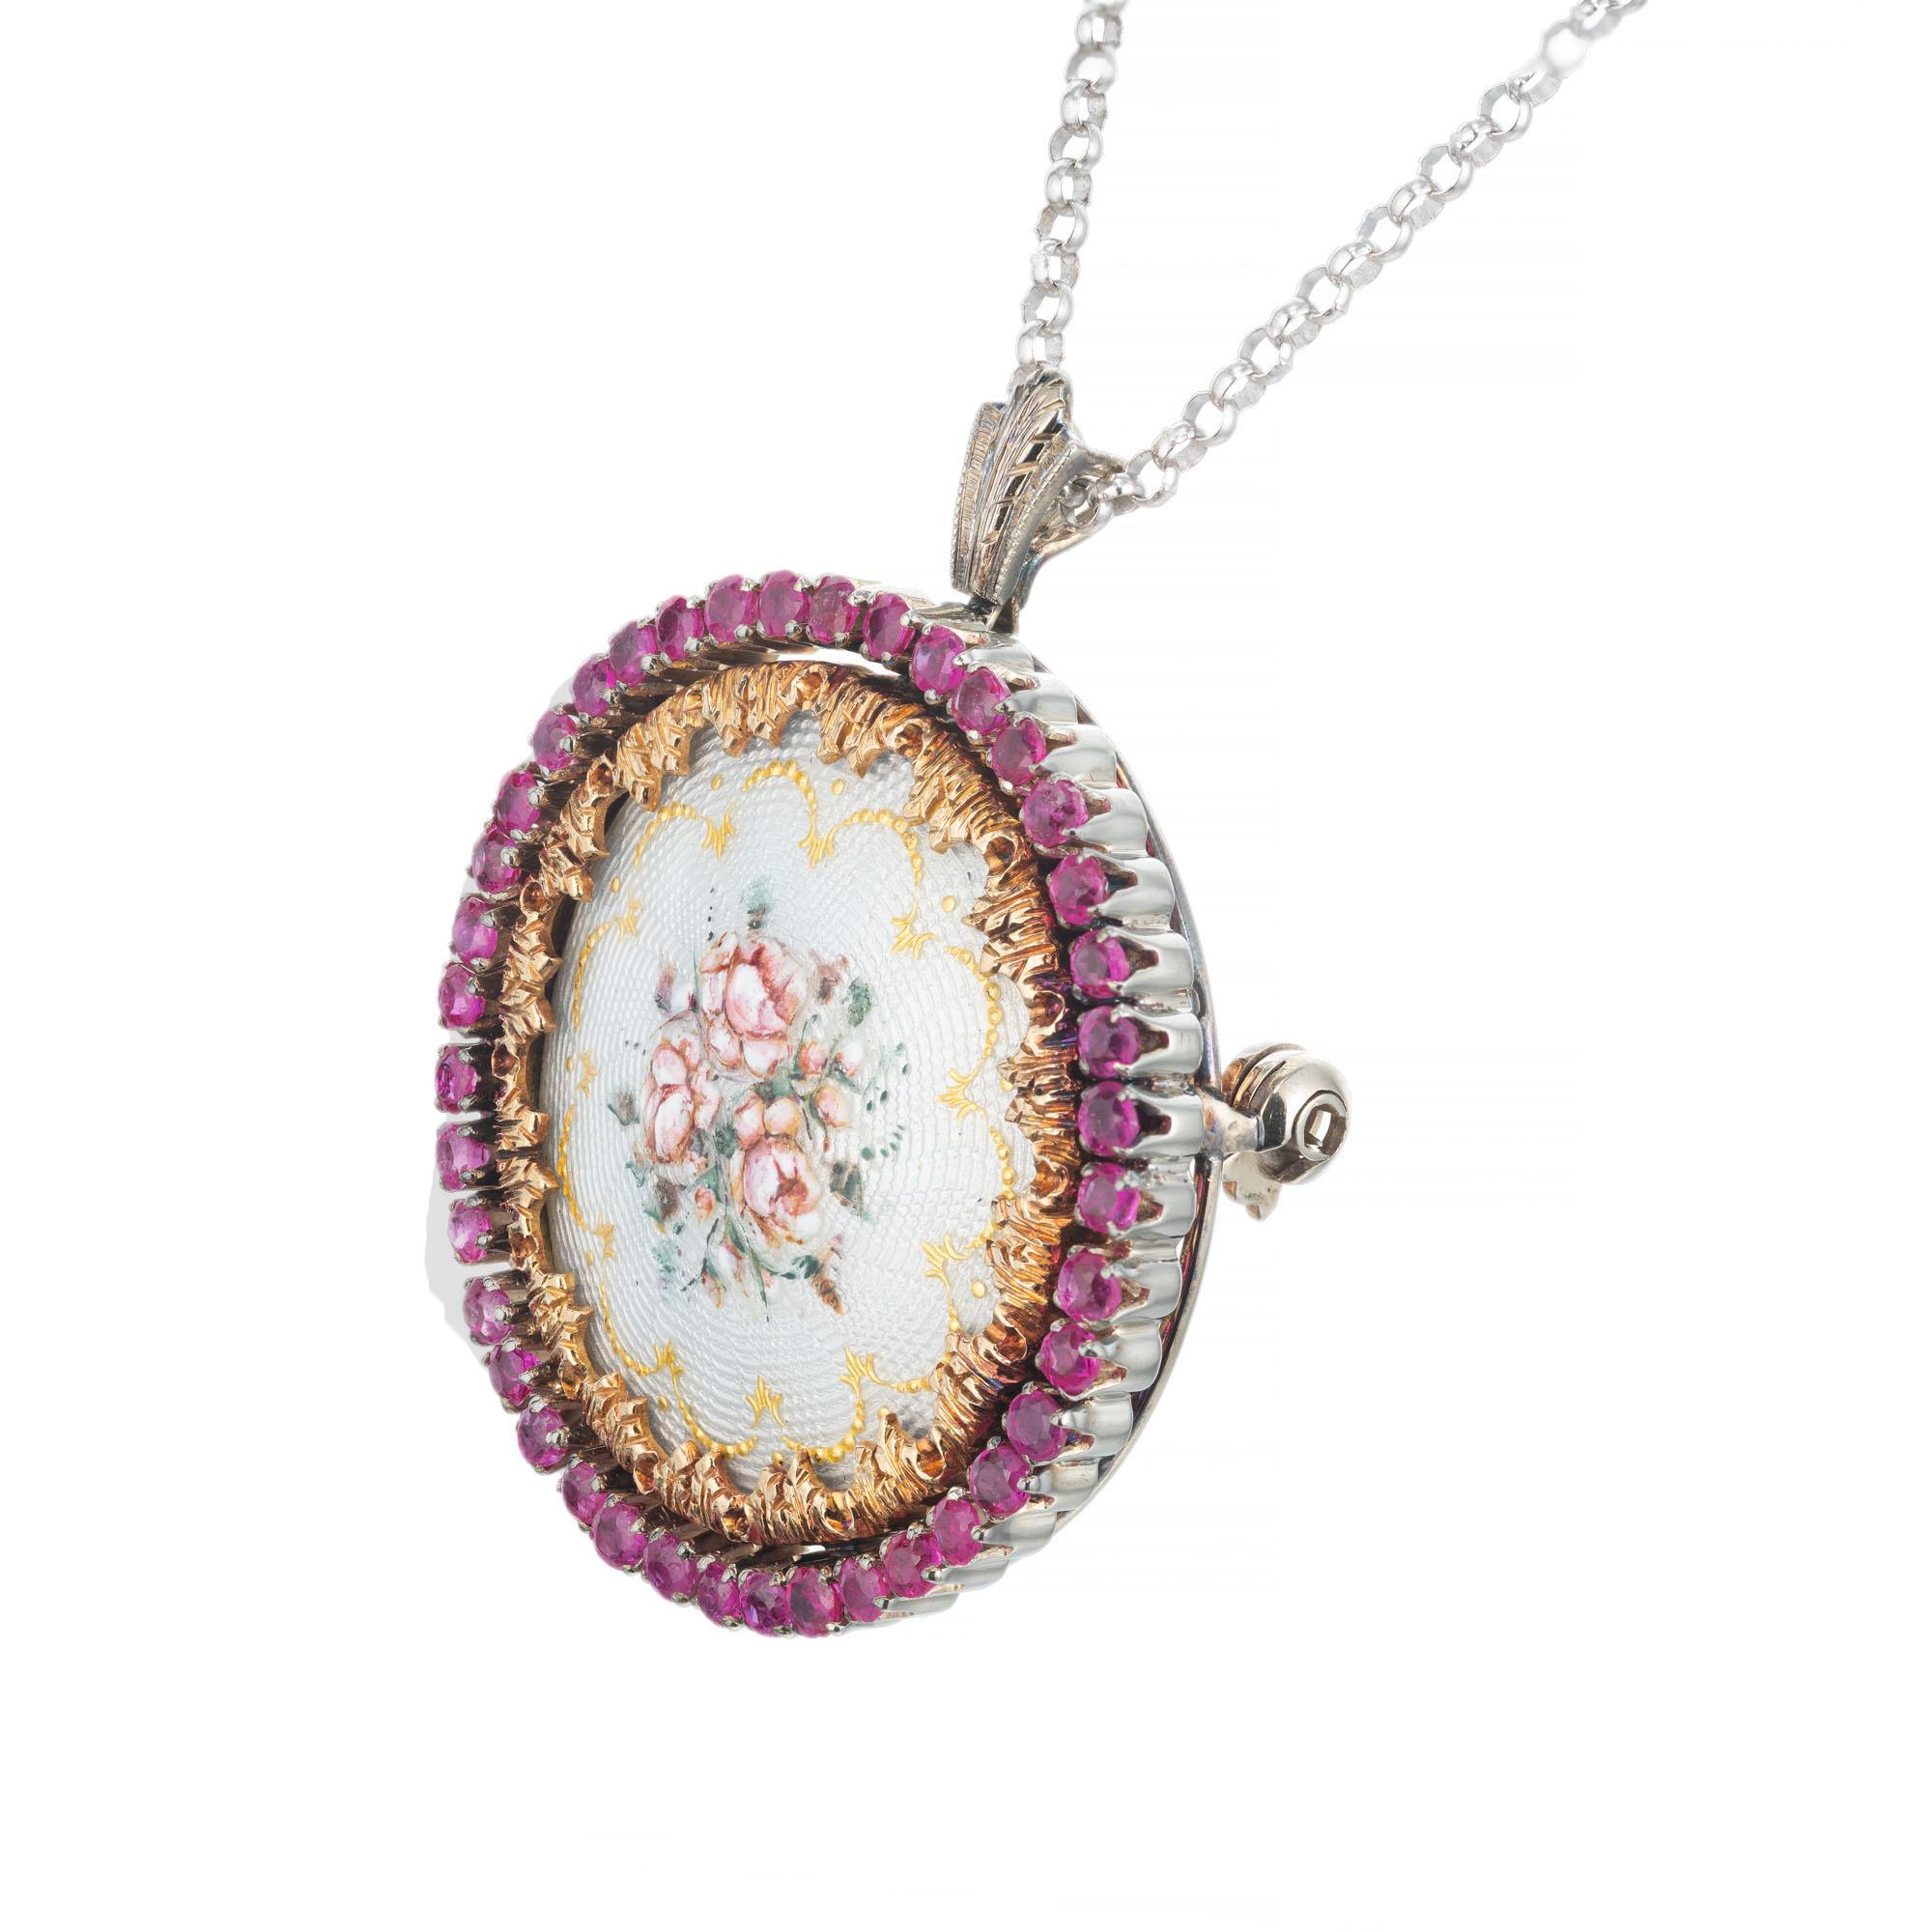 Handmade enamel flower circle Brooch pendant necklace with a halo of pink/red rubies, set in 18k yellow and white gold on a 16 inch chain. 

40 round pinkish red rubies, approx. 1.75cts
18k yellow gold 
18k white gold 
Stamped: 750
Top to bottom: